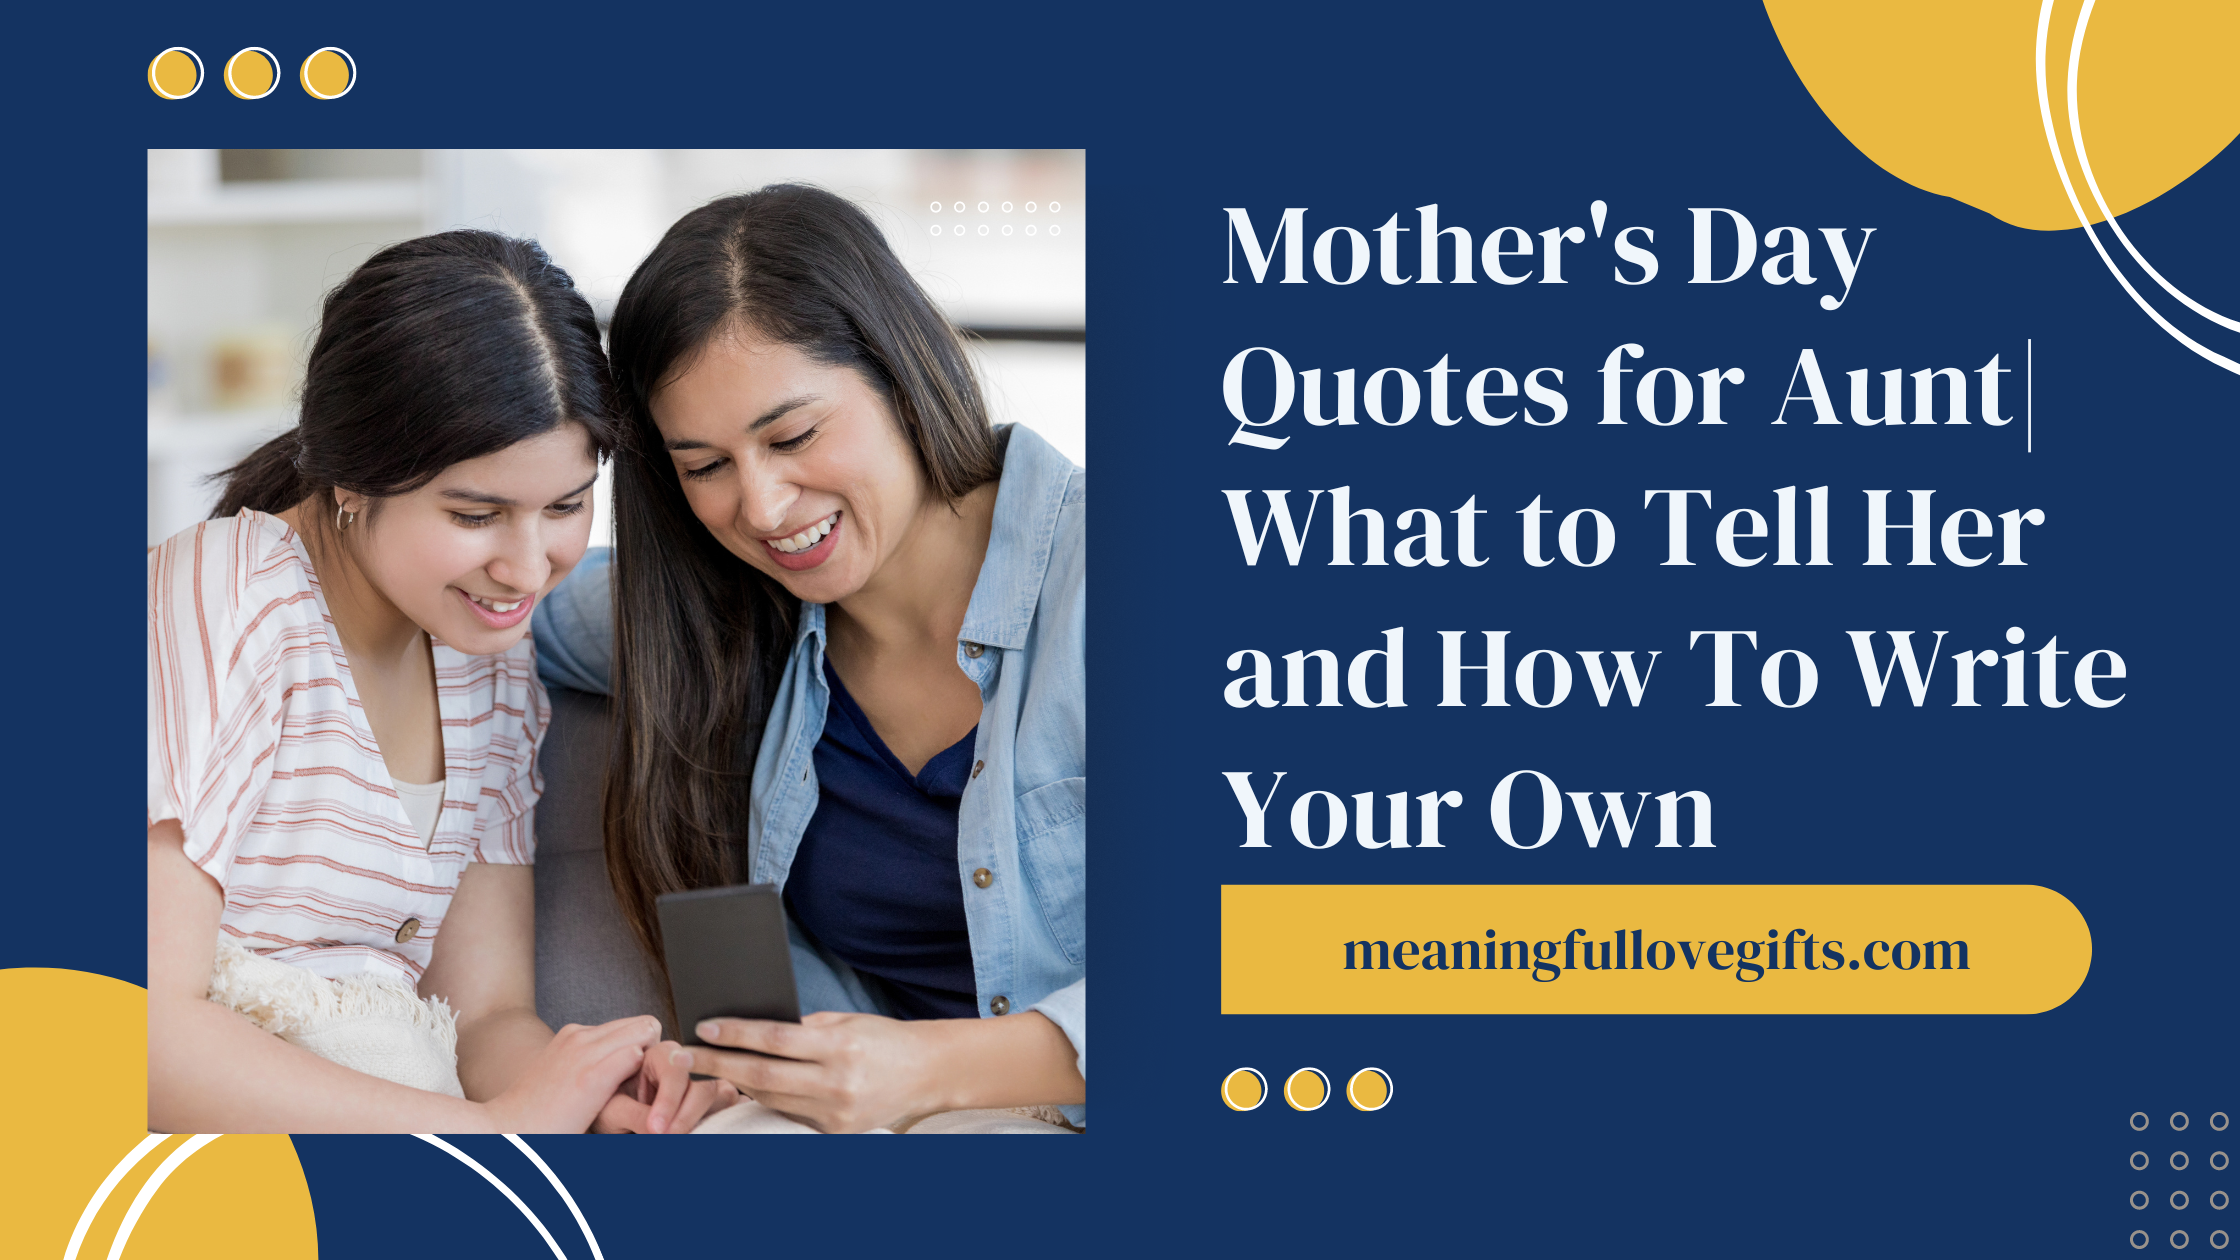 Mother's Day Quotes For Aunt, Mother's Day, Mother's Day Quotes